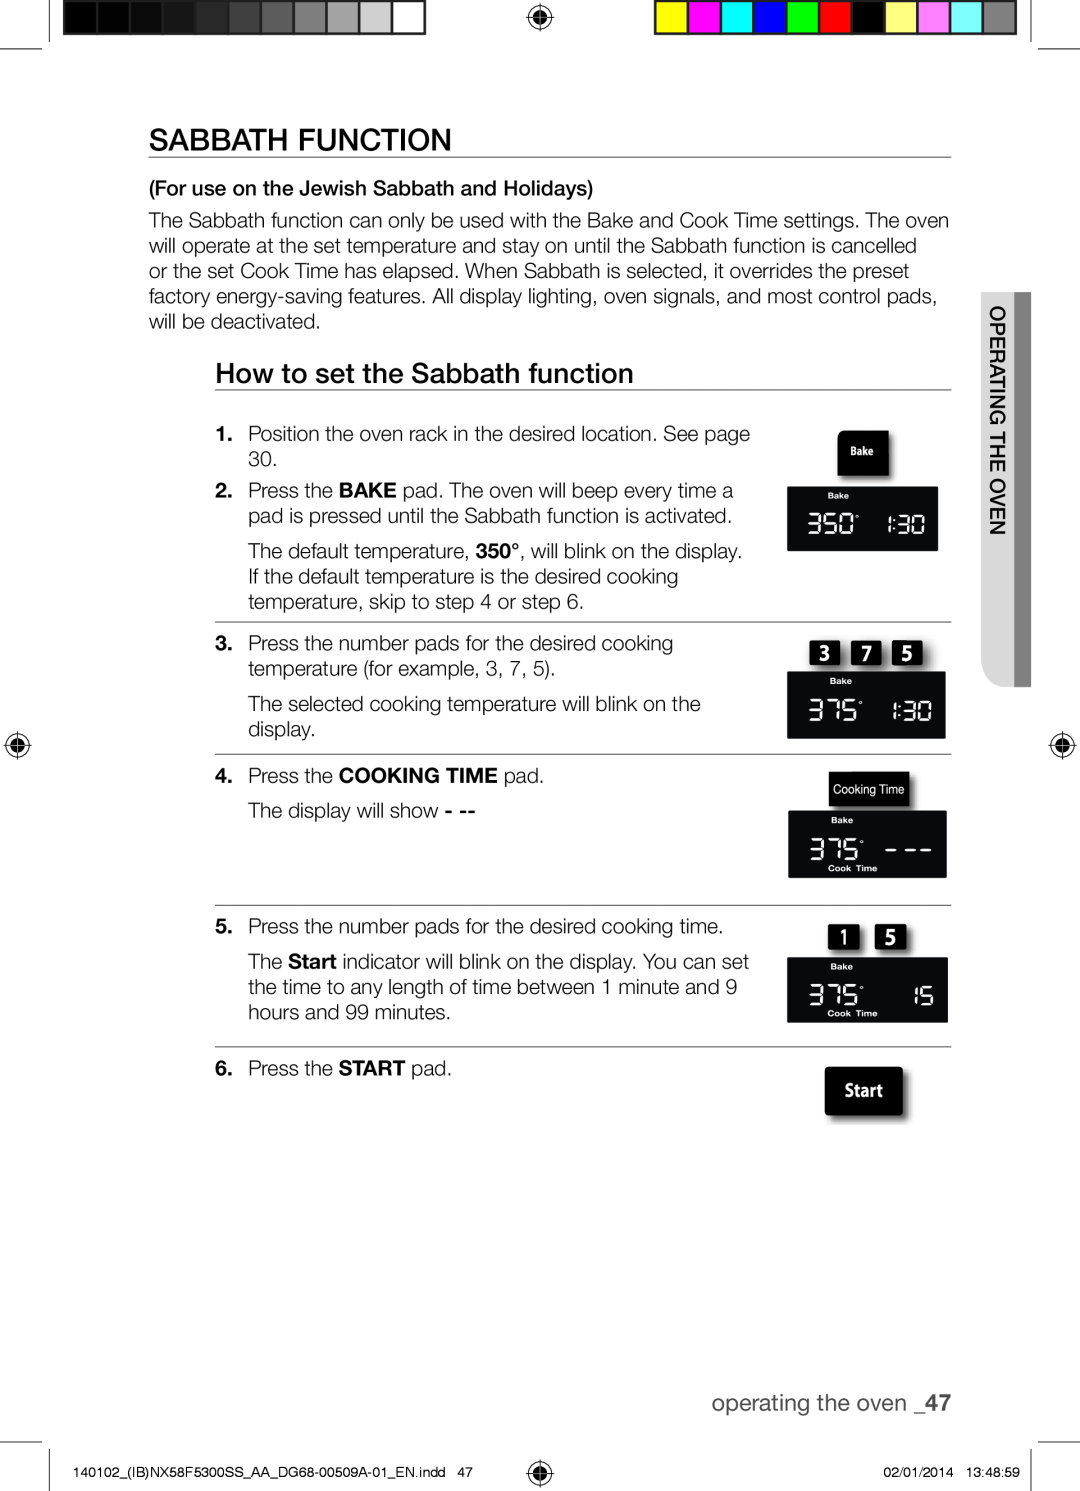 Samsung NX58F5500SW user manual Sabbath Function, How to set the Sabbath function, operating the oven 